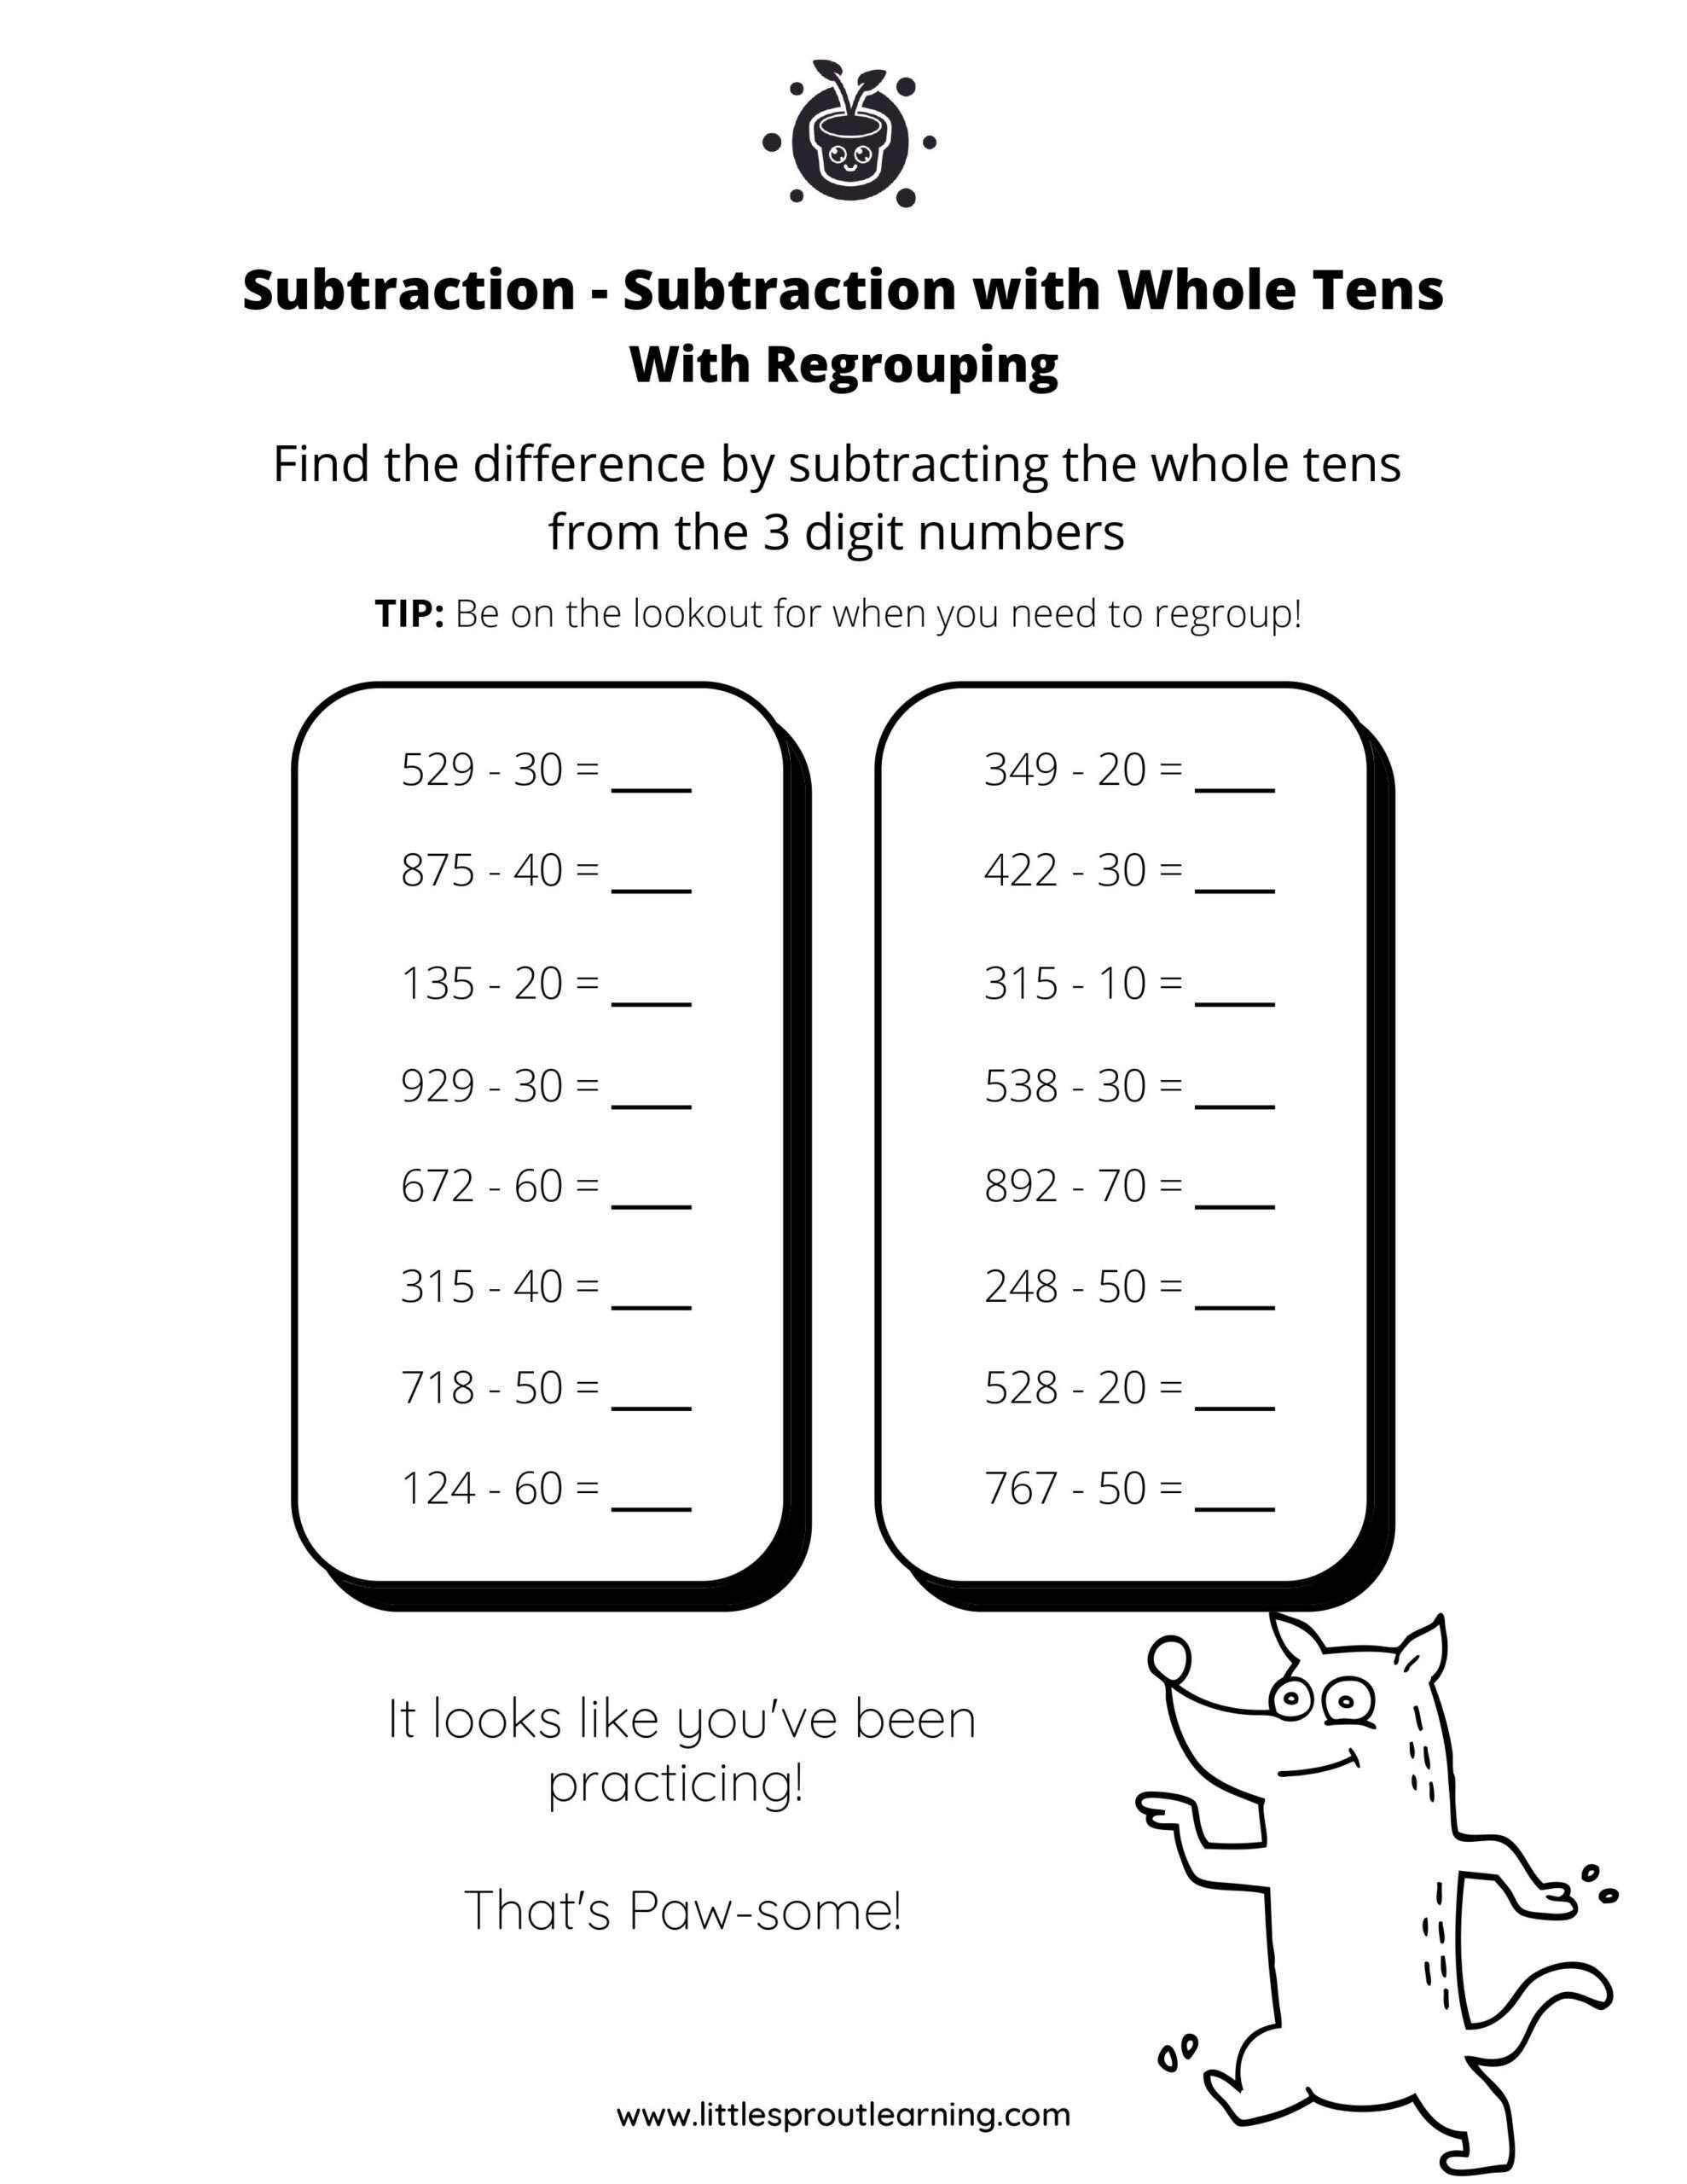 Subtraction with Whole Tens from 2 Digit Numbers